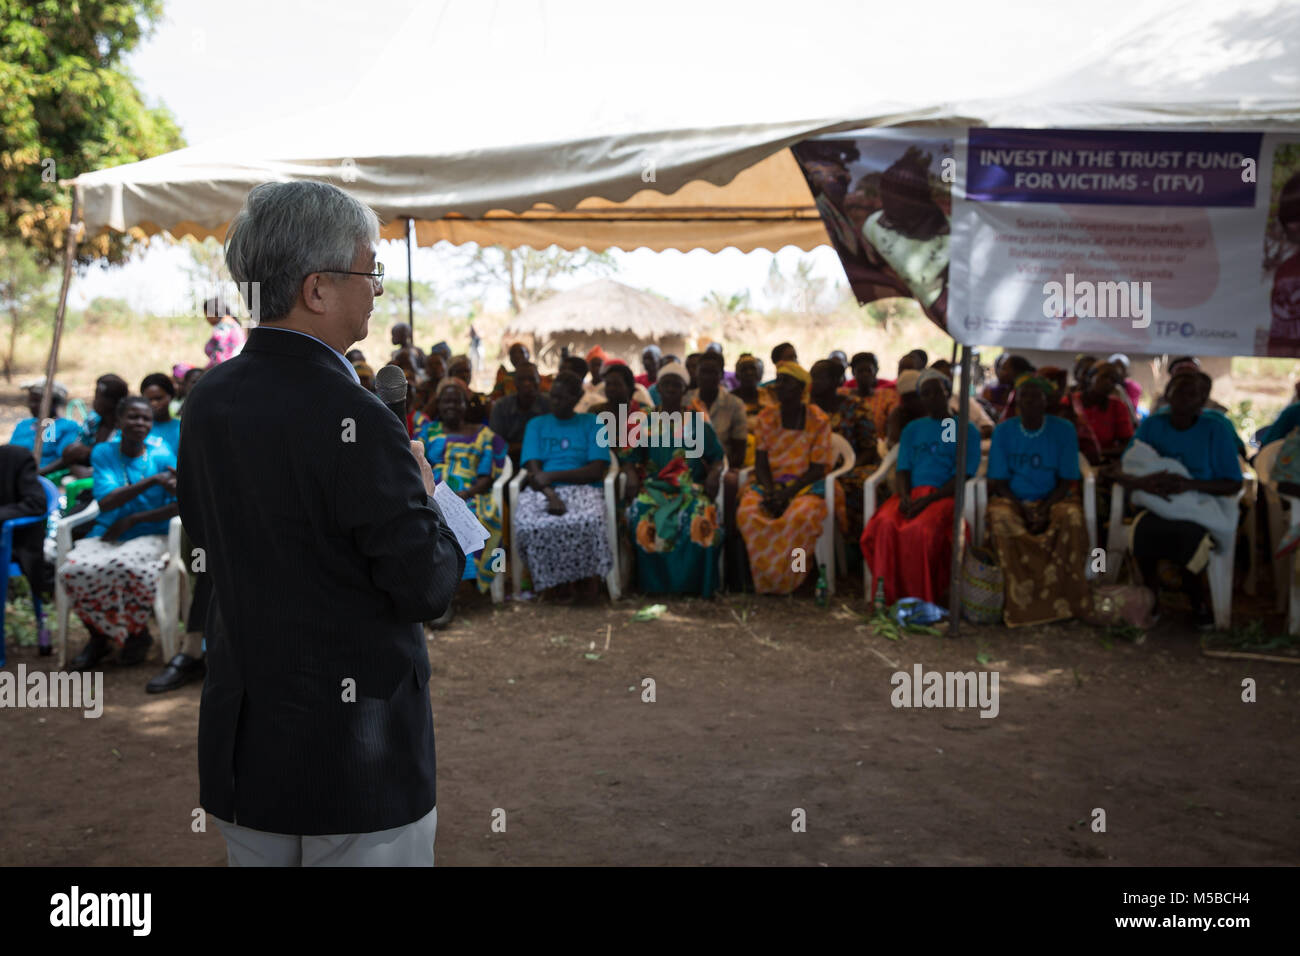 Awach, Gulu, Uganda. 22nd Feb, 2018. Judge O-Gon Kwon, president of the Assembly of State Parties to the ICC, addresses victims of LRA violence in Awach. He said it was the first time in his long career he had come face-to-face with victims of war crimes outside the courtroom, and thanked them for sharing their stories. Credit: Sally Hayden/SOPA/ZUMA Wire/Alamy Live News Stock Photo